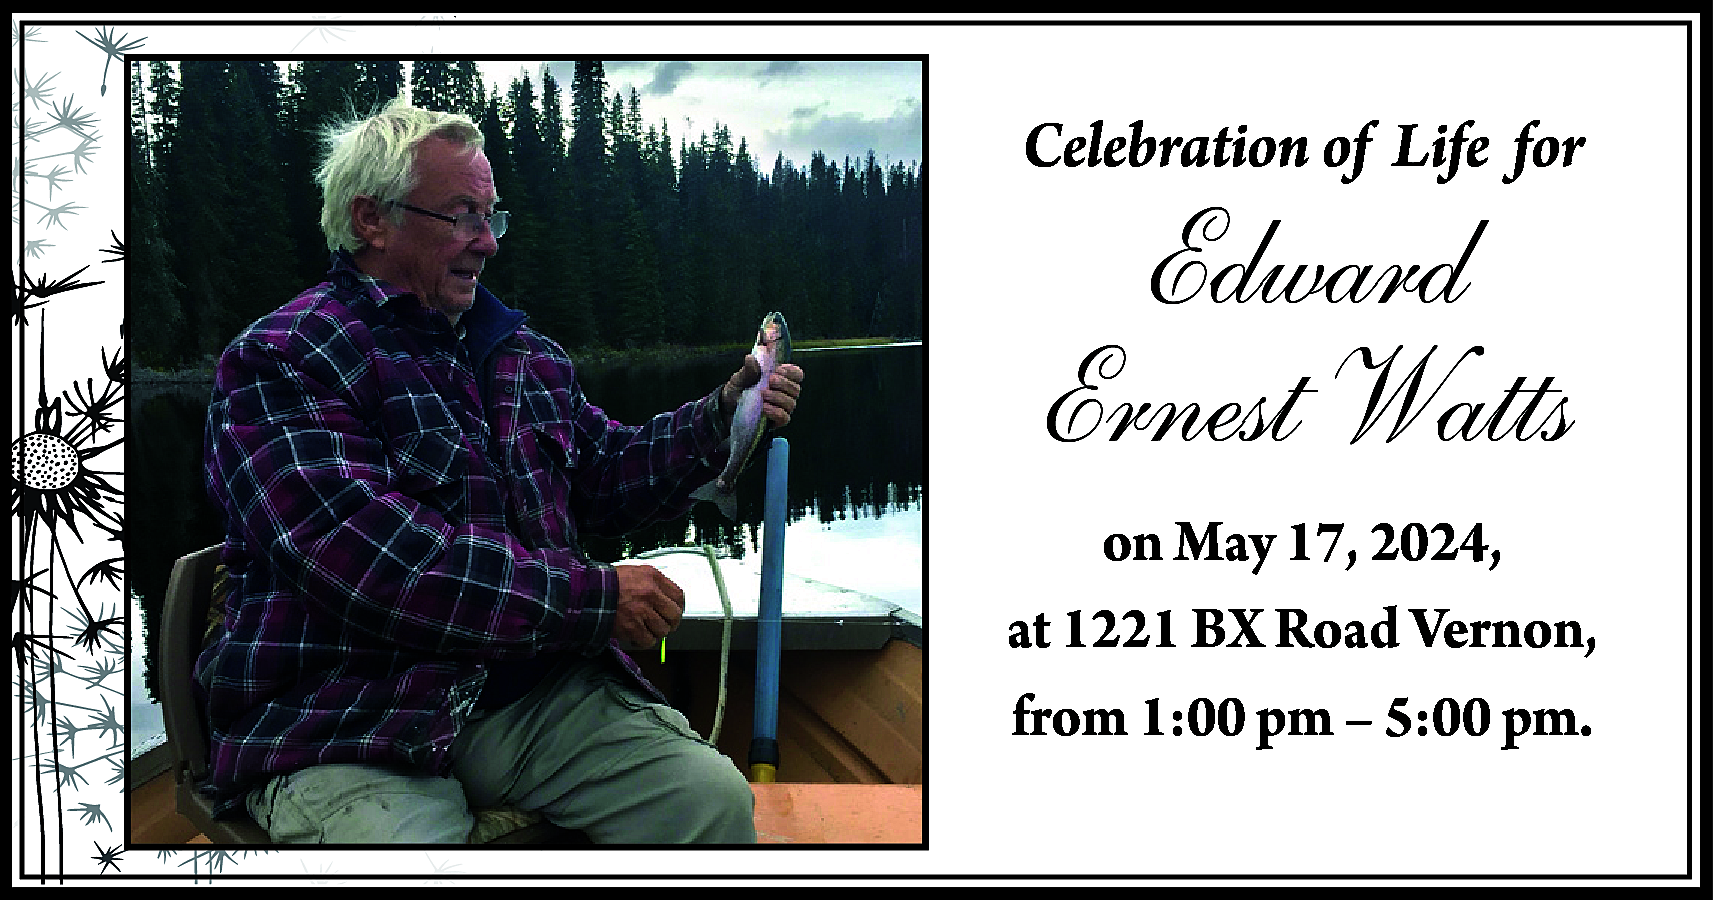 Celebration of Life for <br>  Celebration of Life for    Edward  Ernest Watts    on May 17, 2024,  at 1221 BX Road Vernon,  from 1:00 pm – 5:00 pm.    